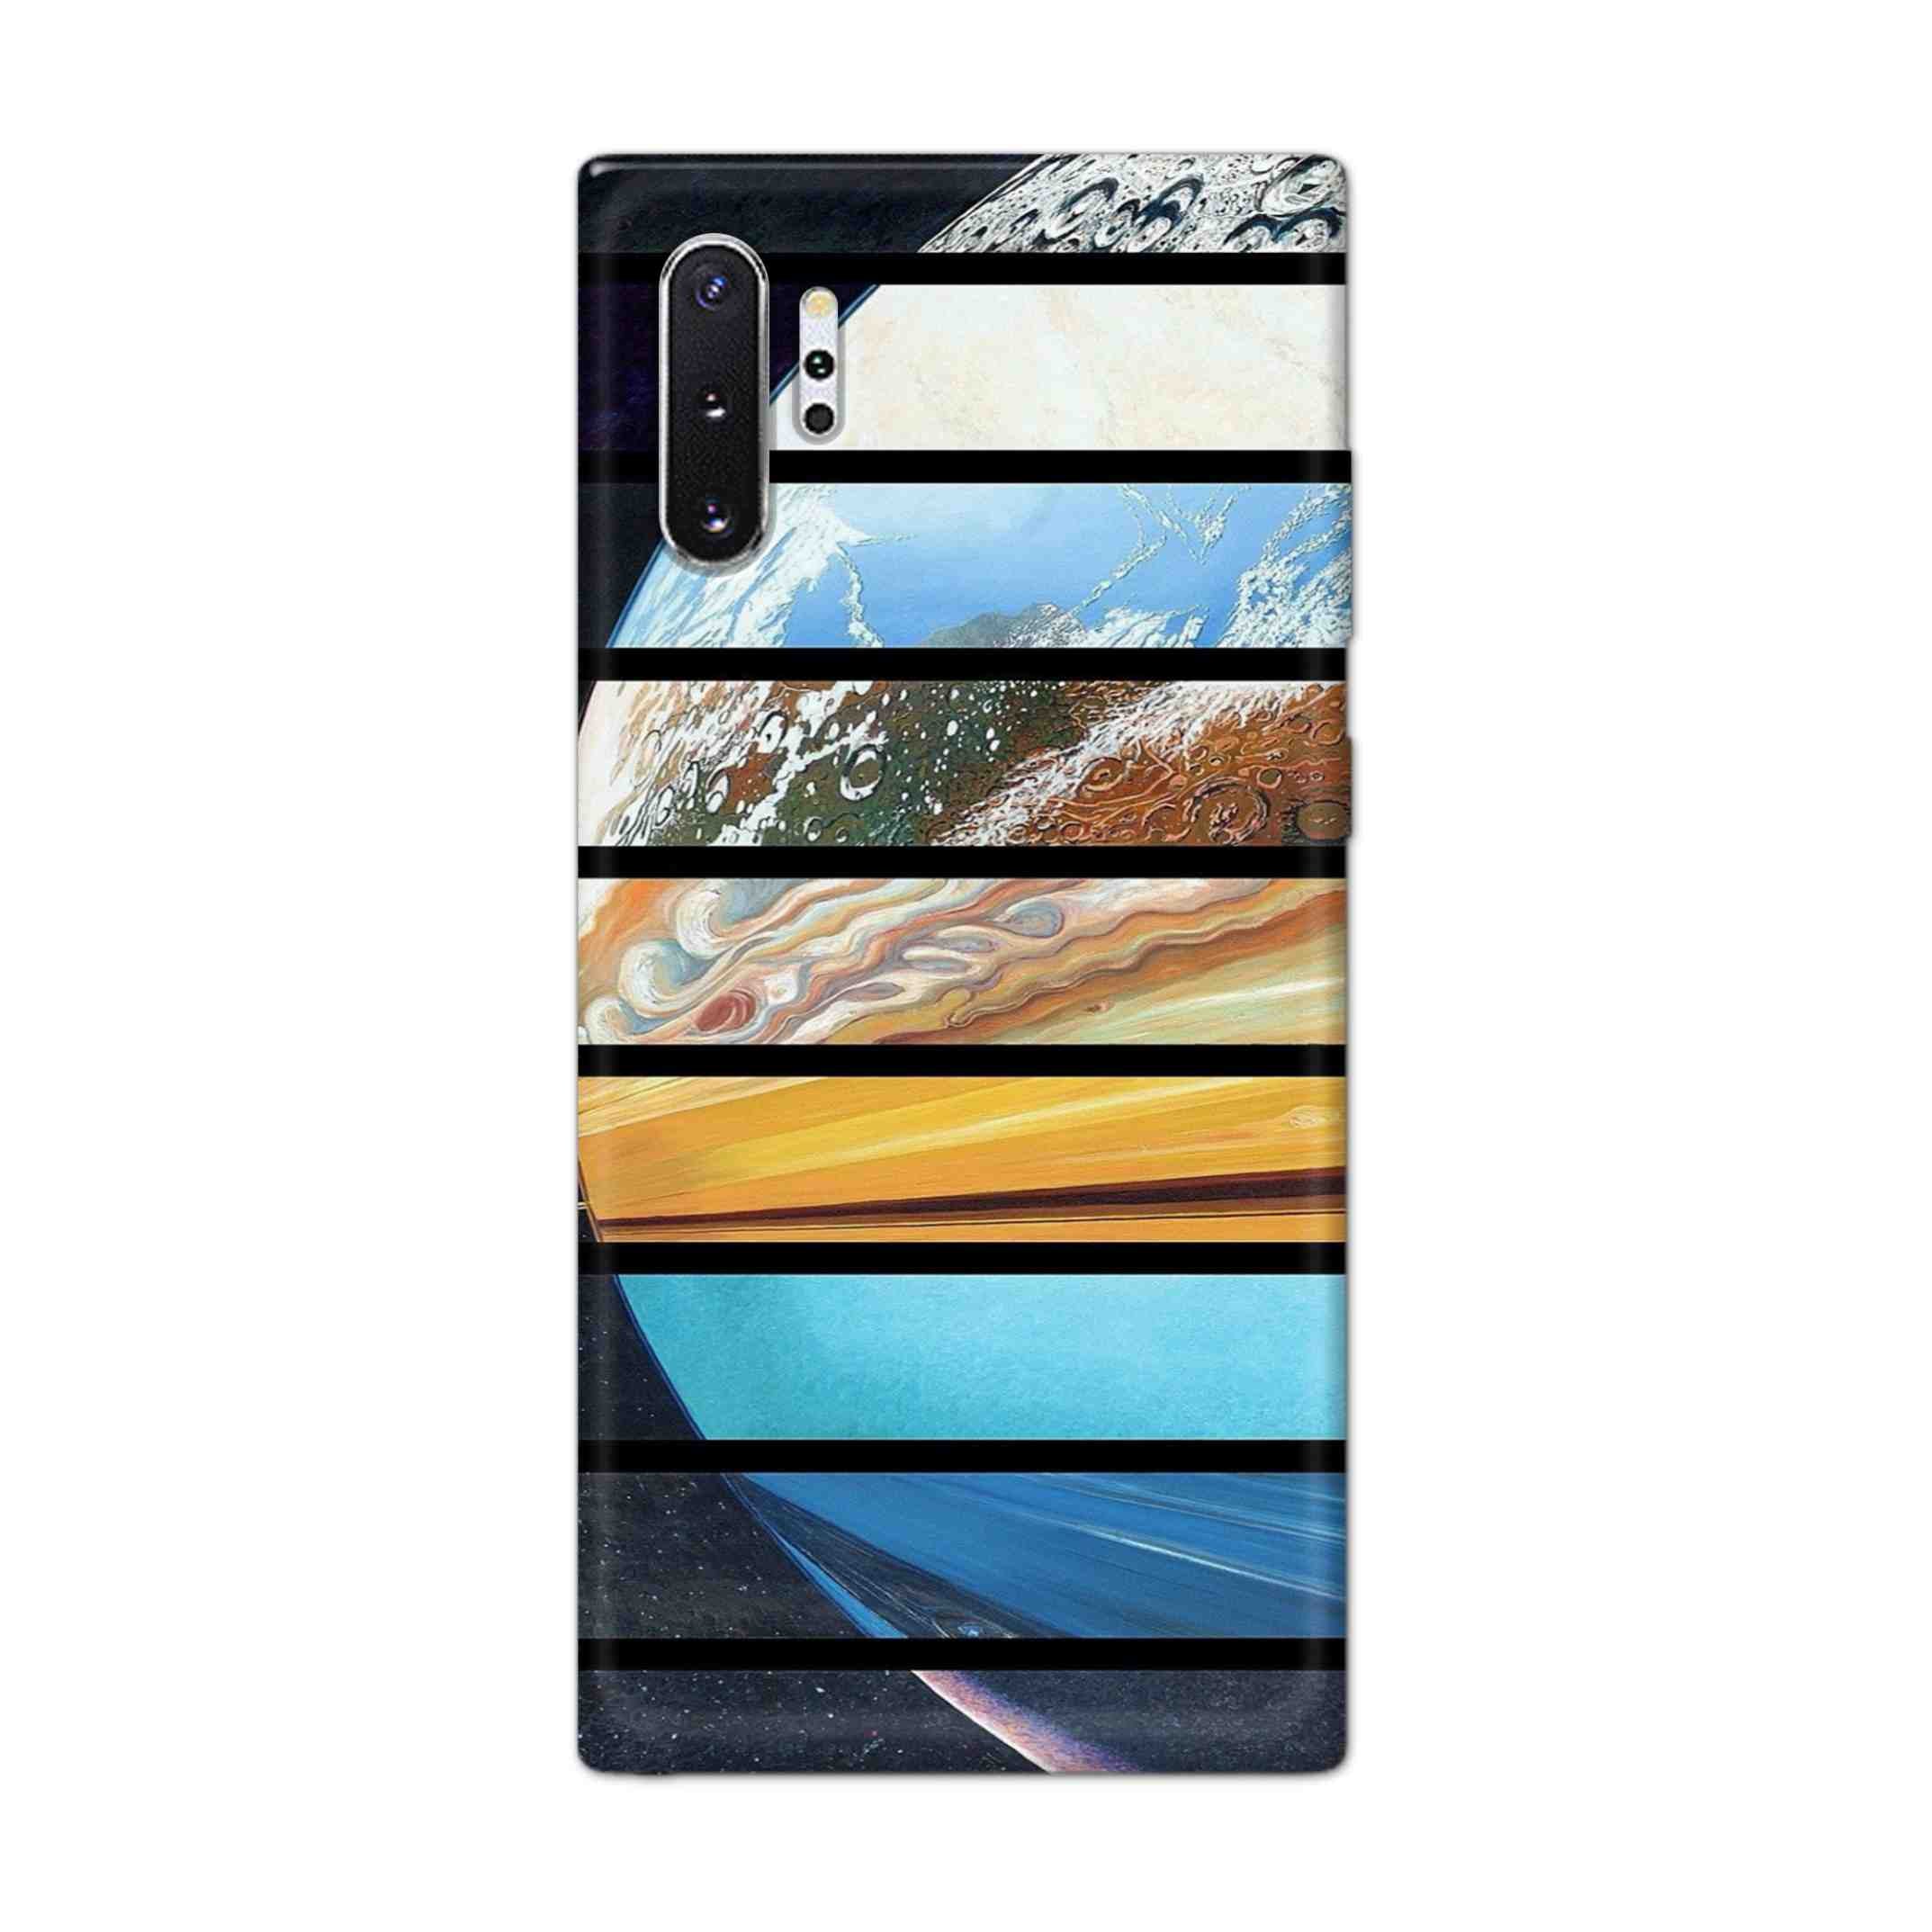 Buy Colourful Earth Hard Back Mobile Phone Case Cover For Samsung Note 10 Plus (5G) Online